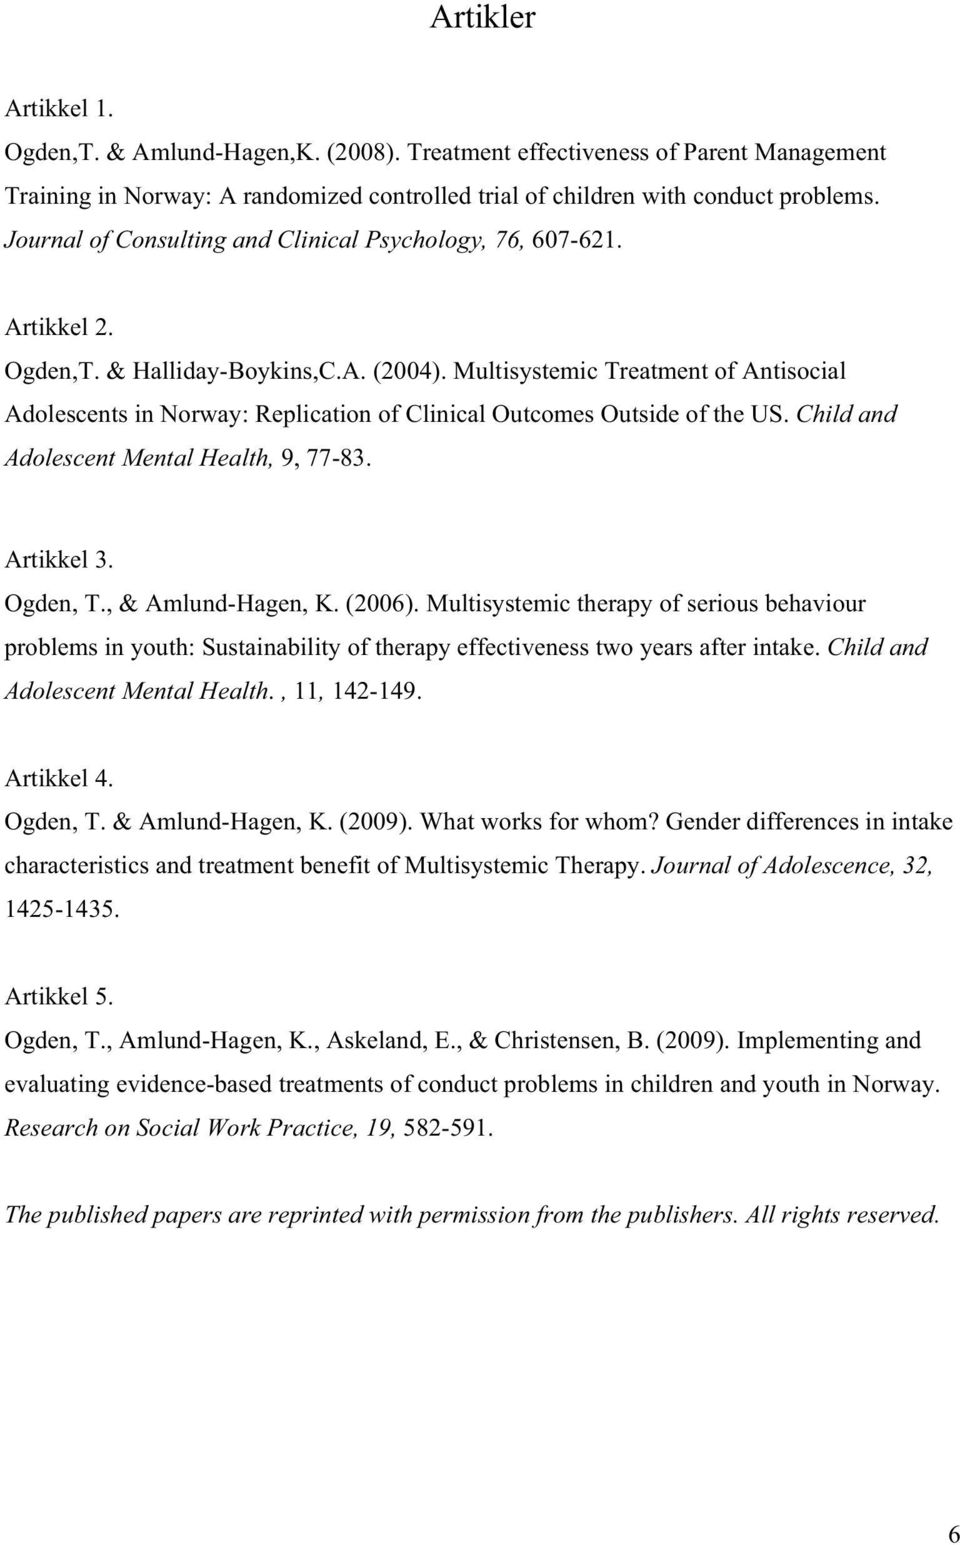 Multisystemic Treatment of Antisocial Adolescents in Norway: Replication of Clinical Outcomes Outside of the US. Child and Adolescent Mental Health, 9, 77-83. Artikkel 3. Ogden, T., & Amlund-Hagen, K.